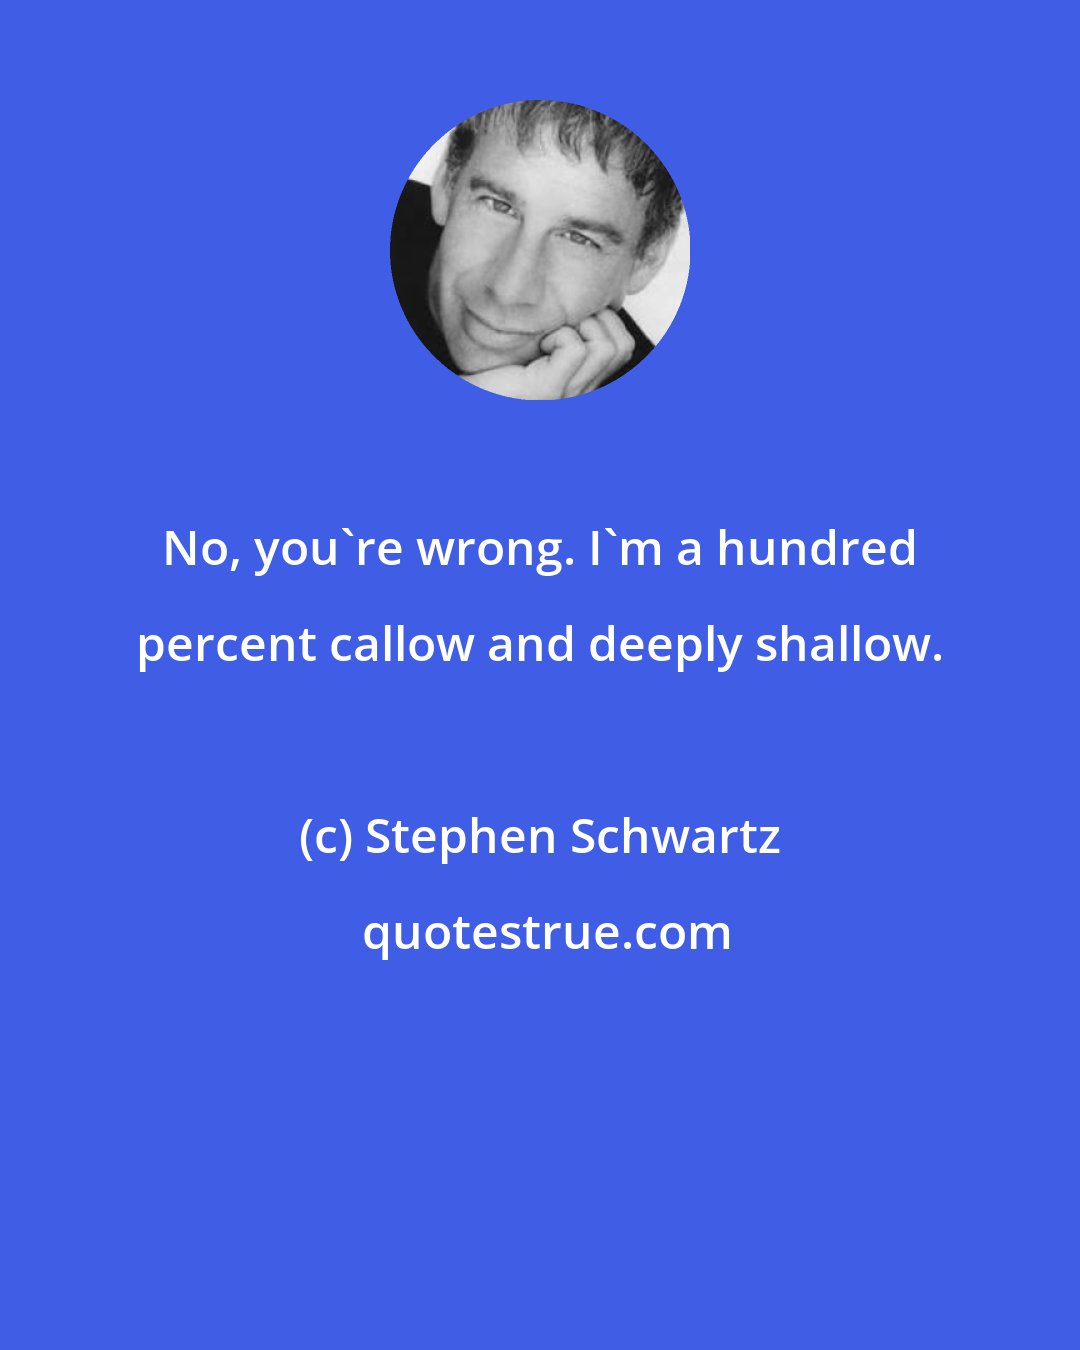 Stephen Schwartz: No, you're wrong. I'm a hundred percent callow and deeply shallow.